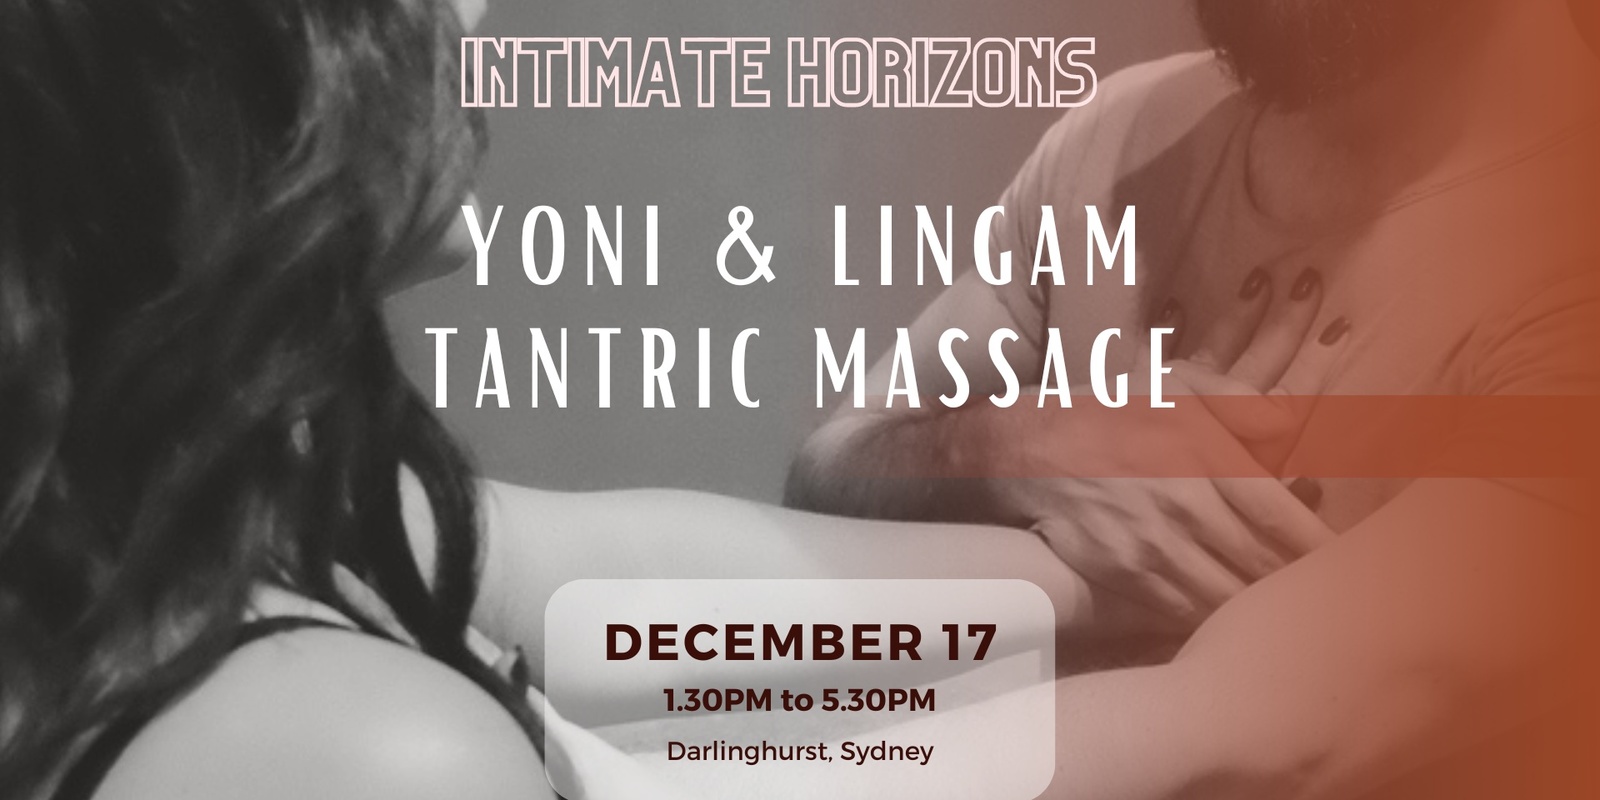 dawn gravely recommends how to do a lingam massage pic